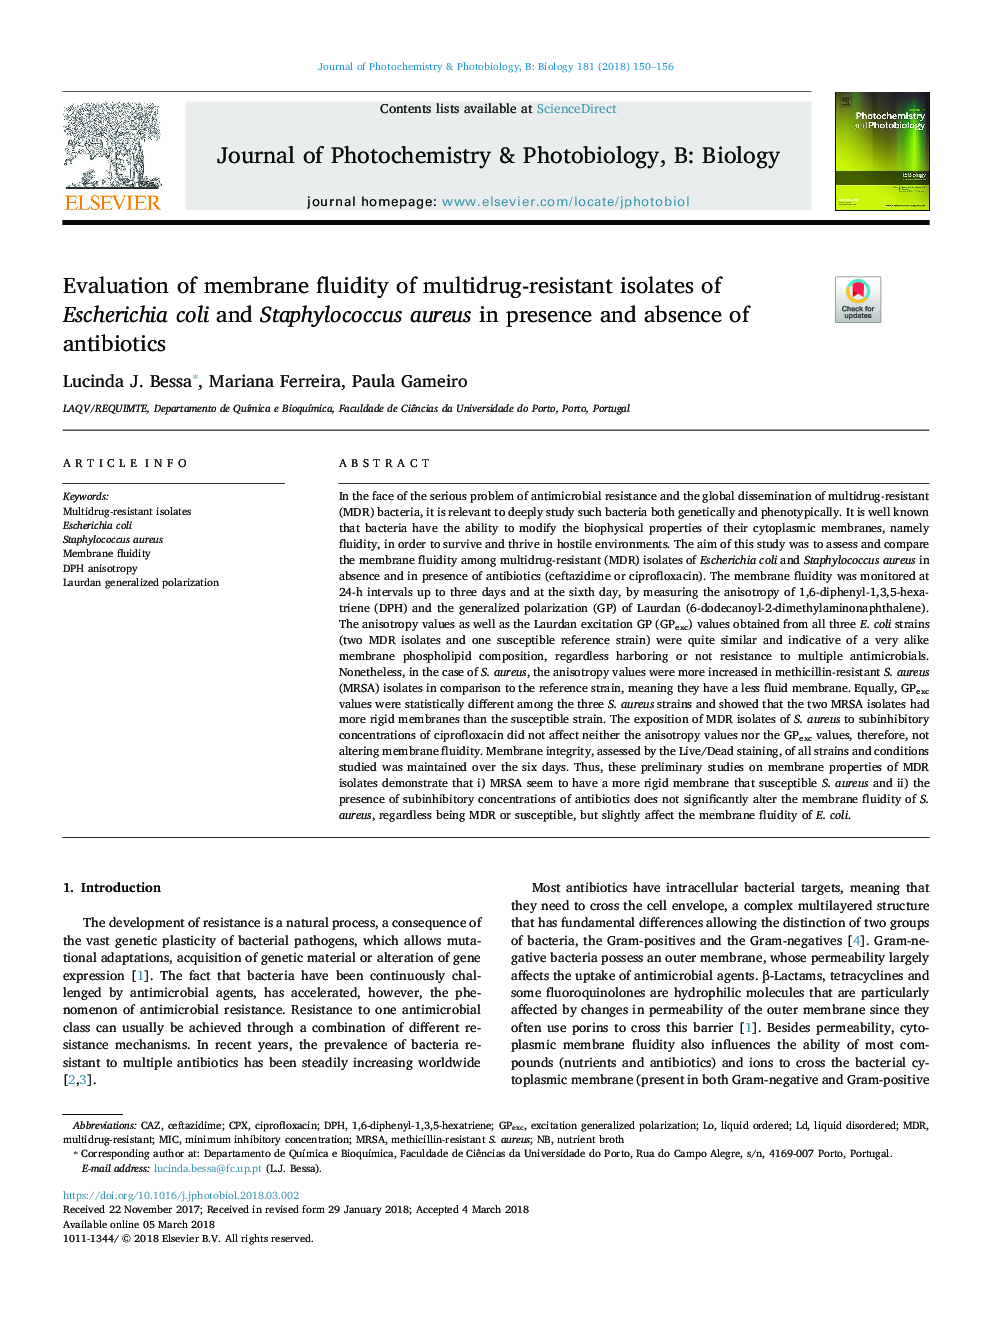 Evaluation of membrane fluidity of multidrug-resistant isolates of Escherichia coli and Staphylococcus aureus in presence and absence of antibiotics